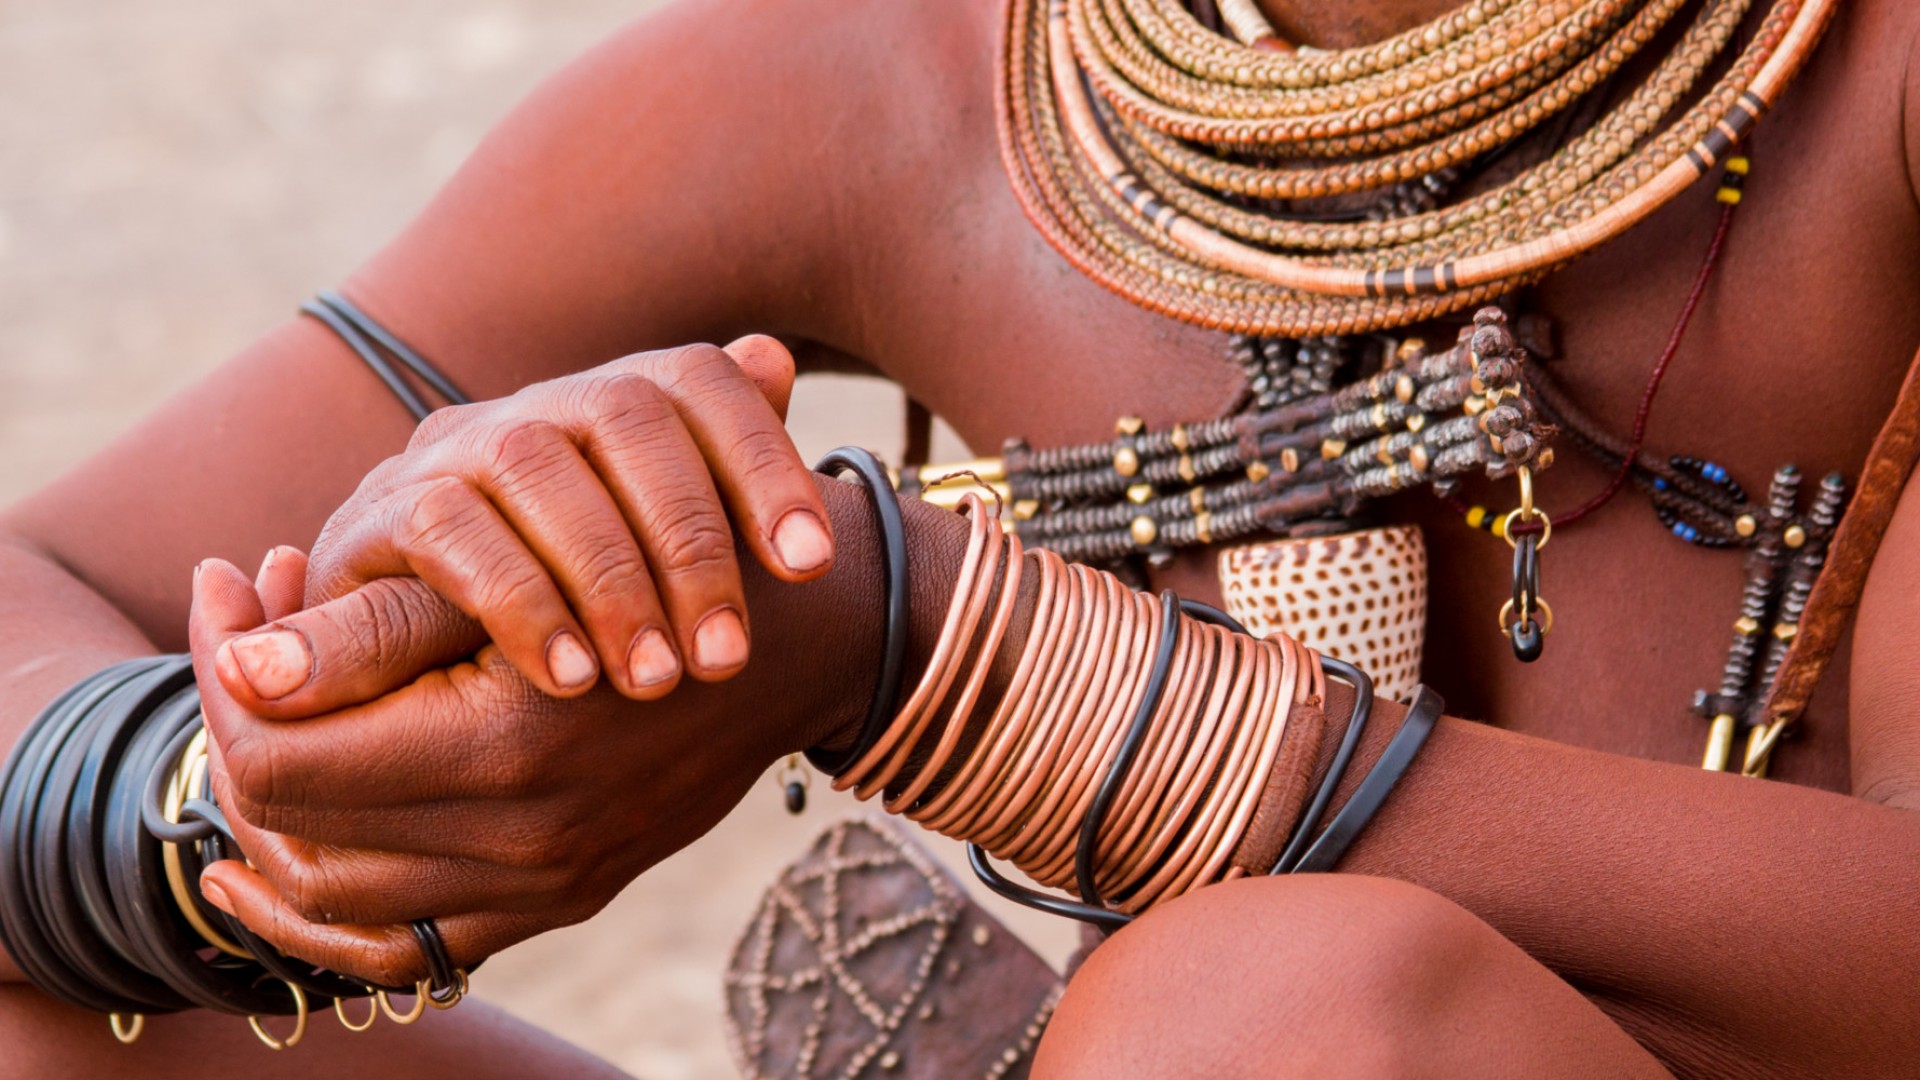 himba people in Namibia